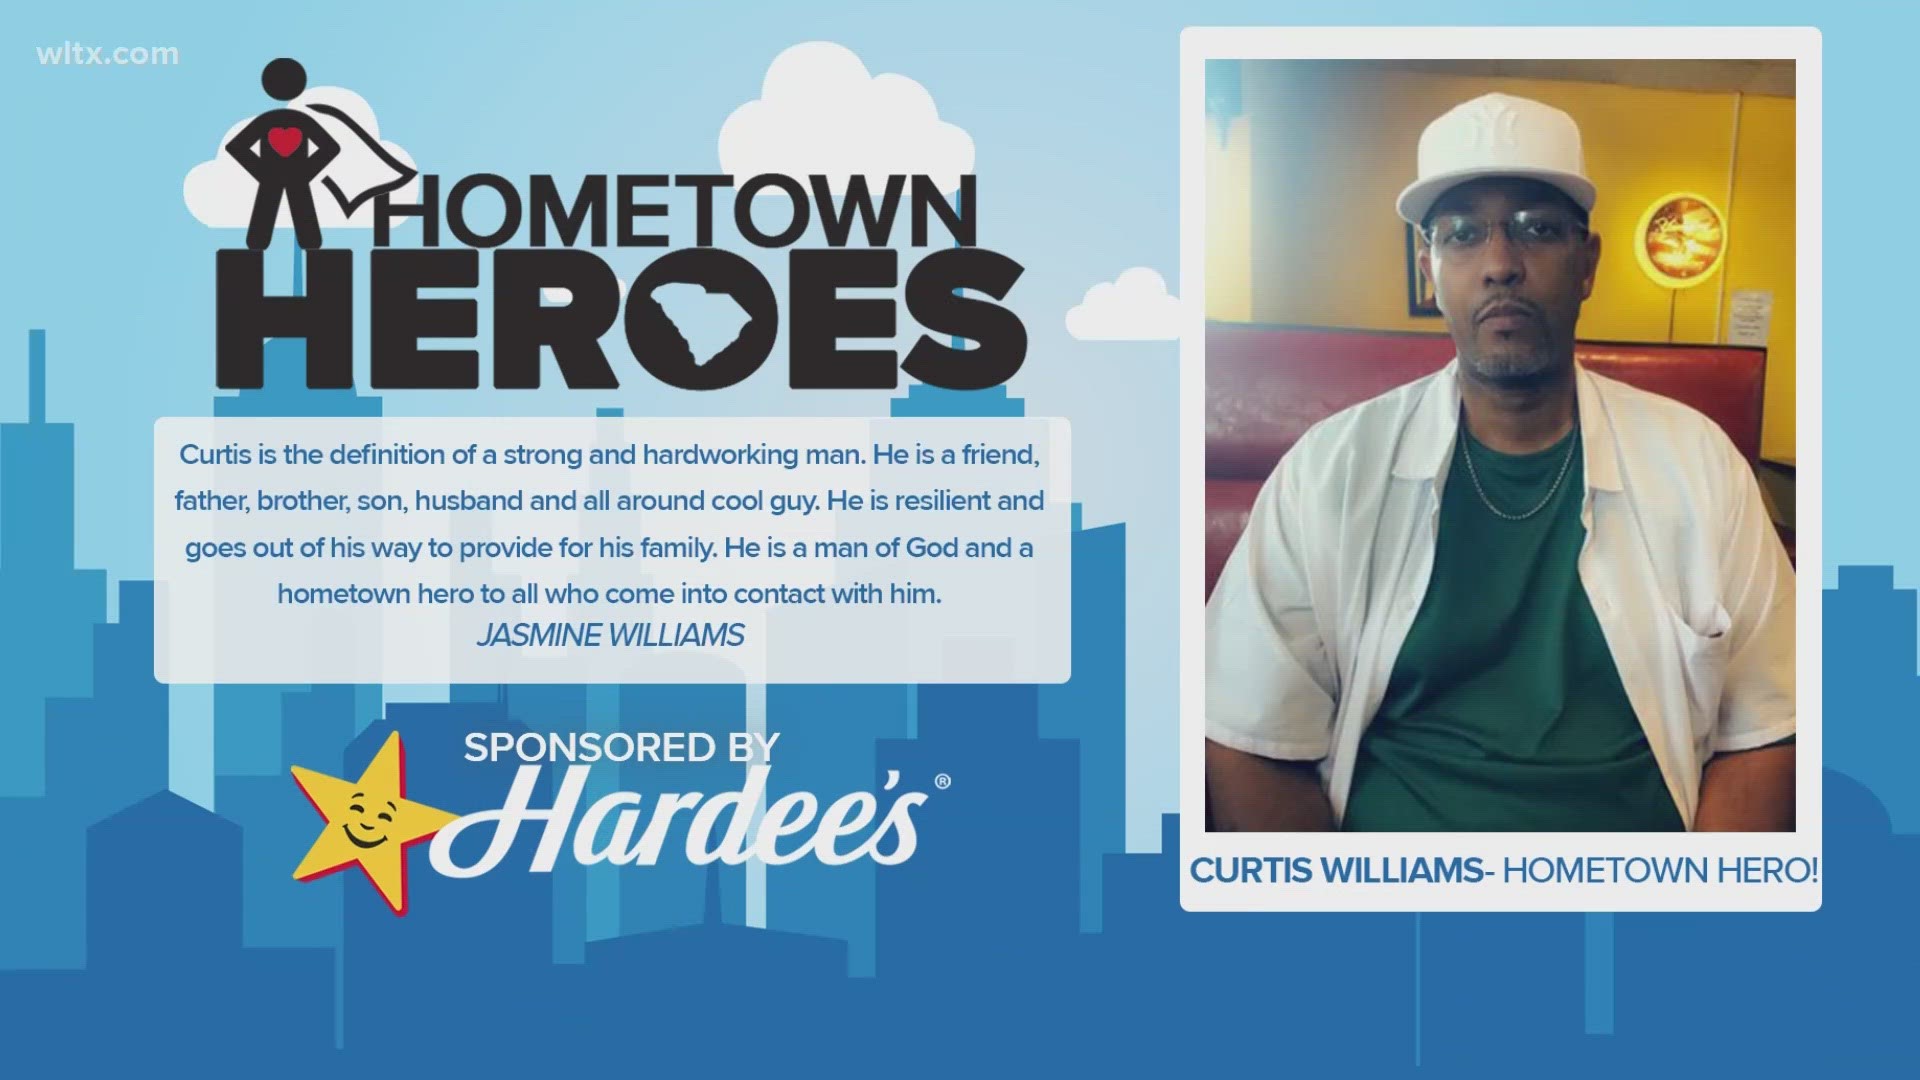 Curtis is known for being stong, hardworking and going above and beyond for his family.